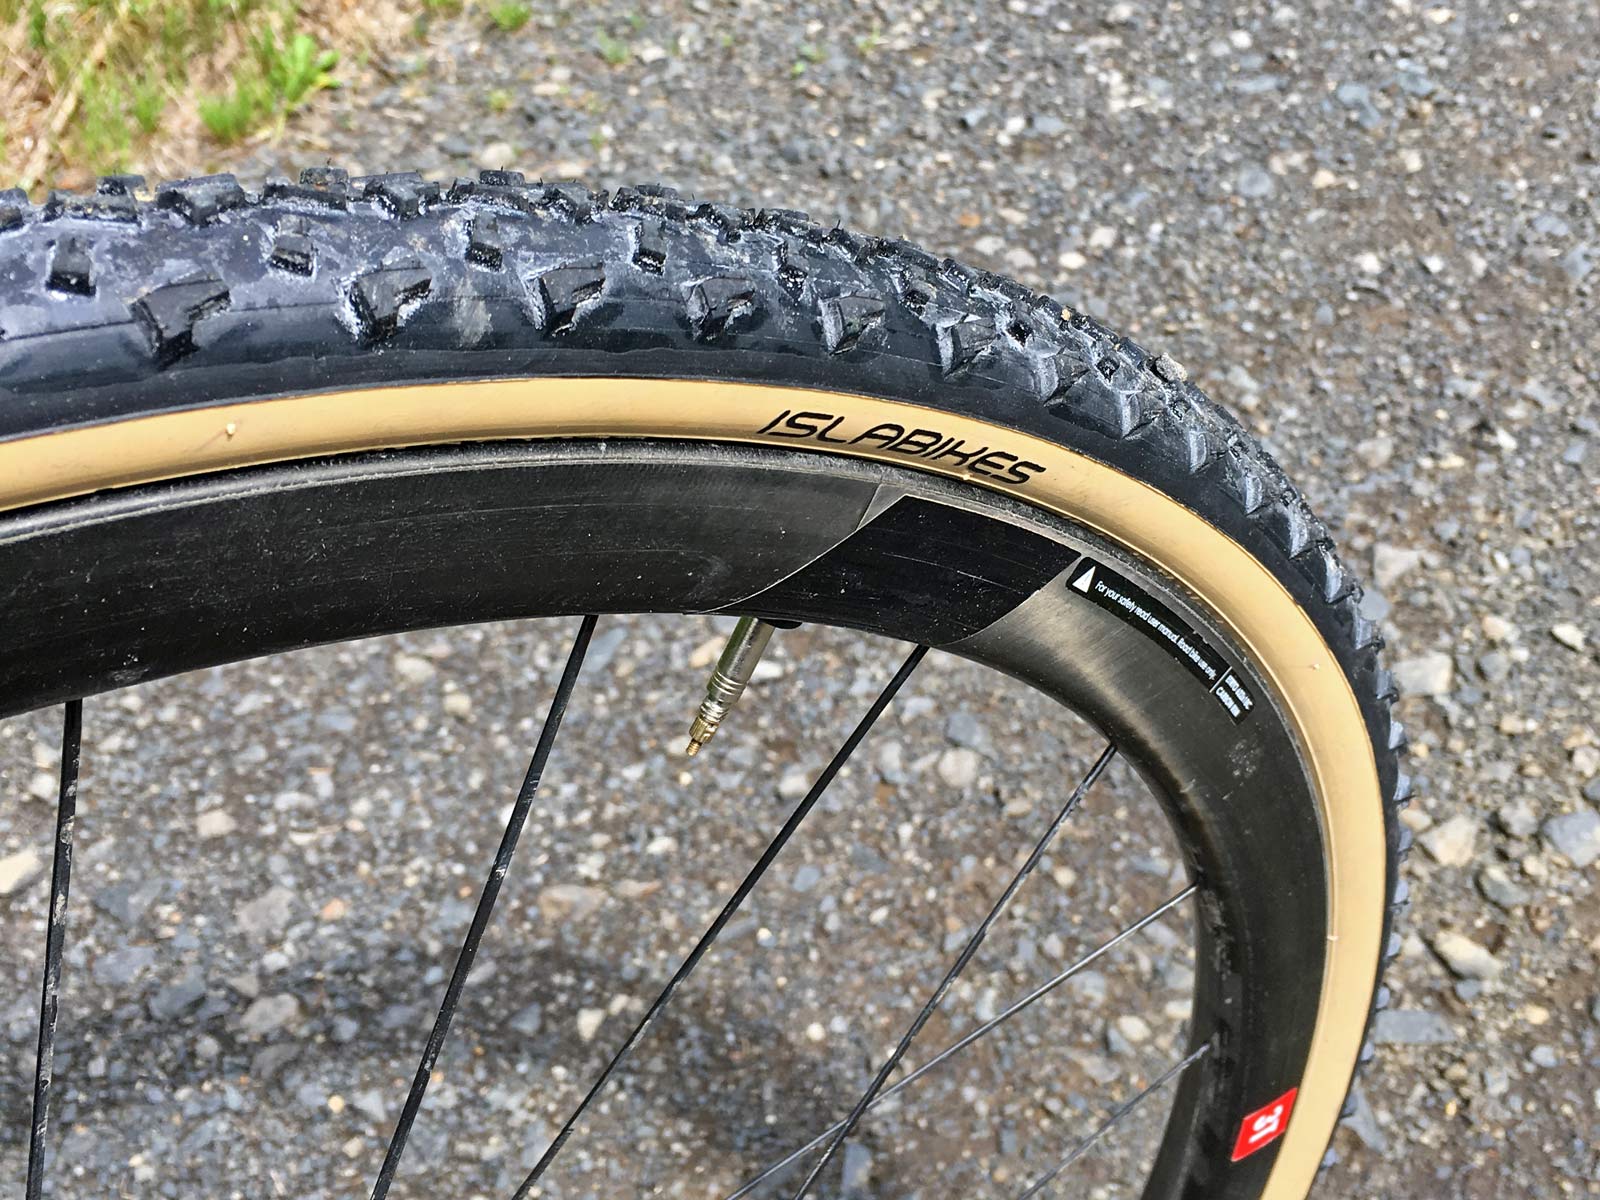 Review: Islabikes Greim Pro tubeless cyclocross tires grip everything